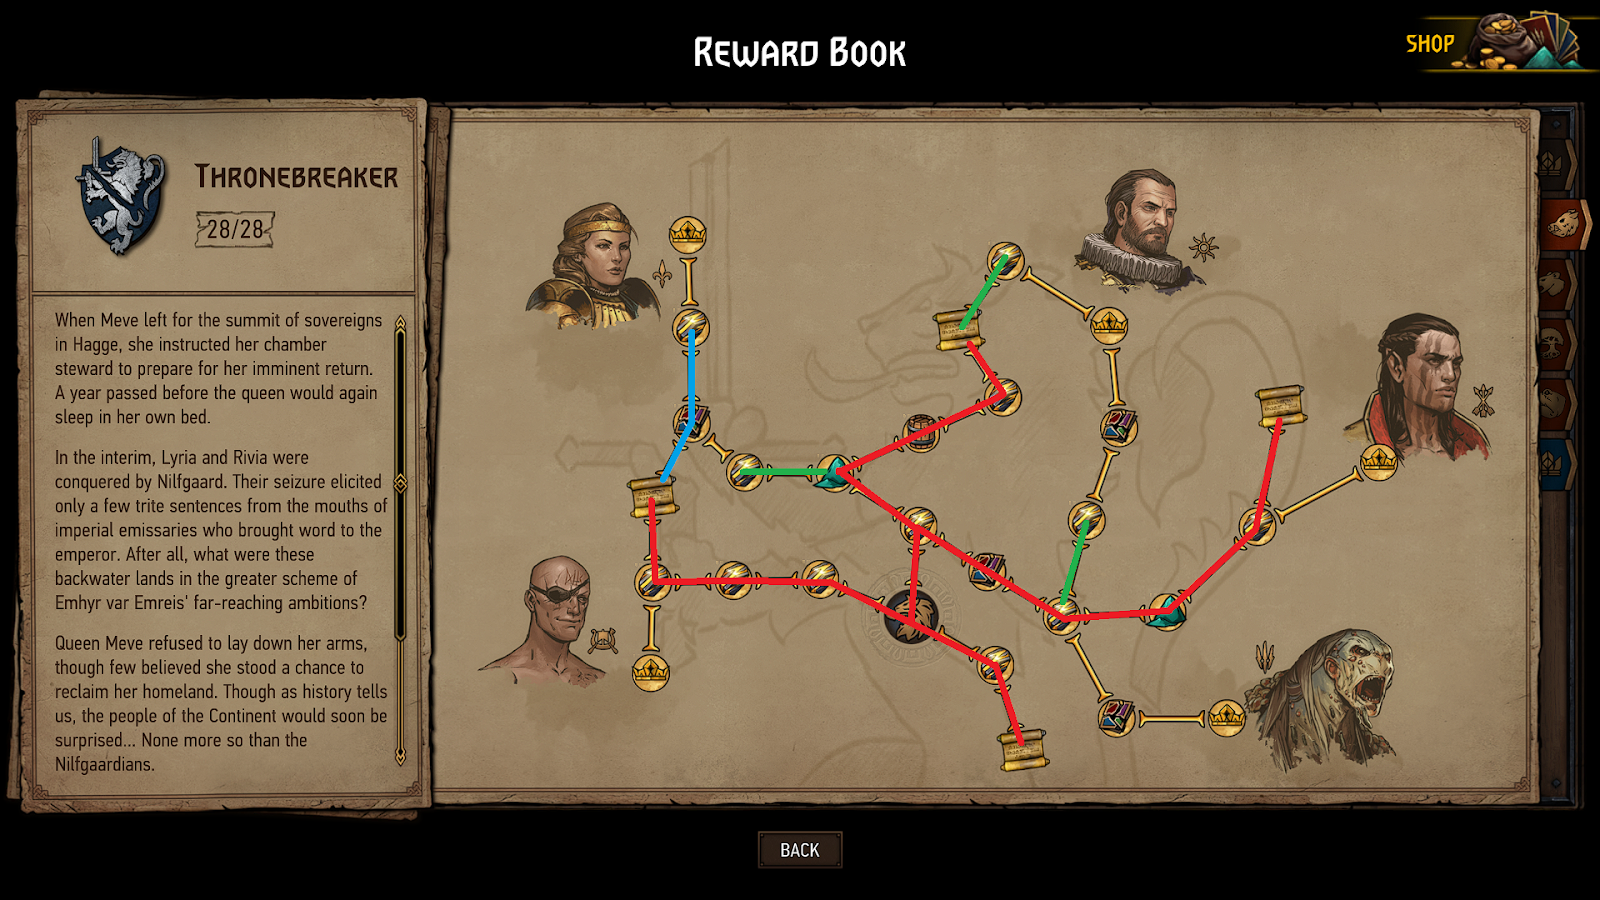 The different routes are shown in red, blue and green on the reward tree for Thronebreaker